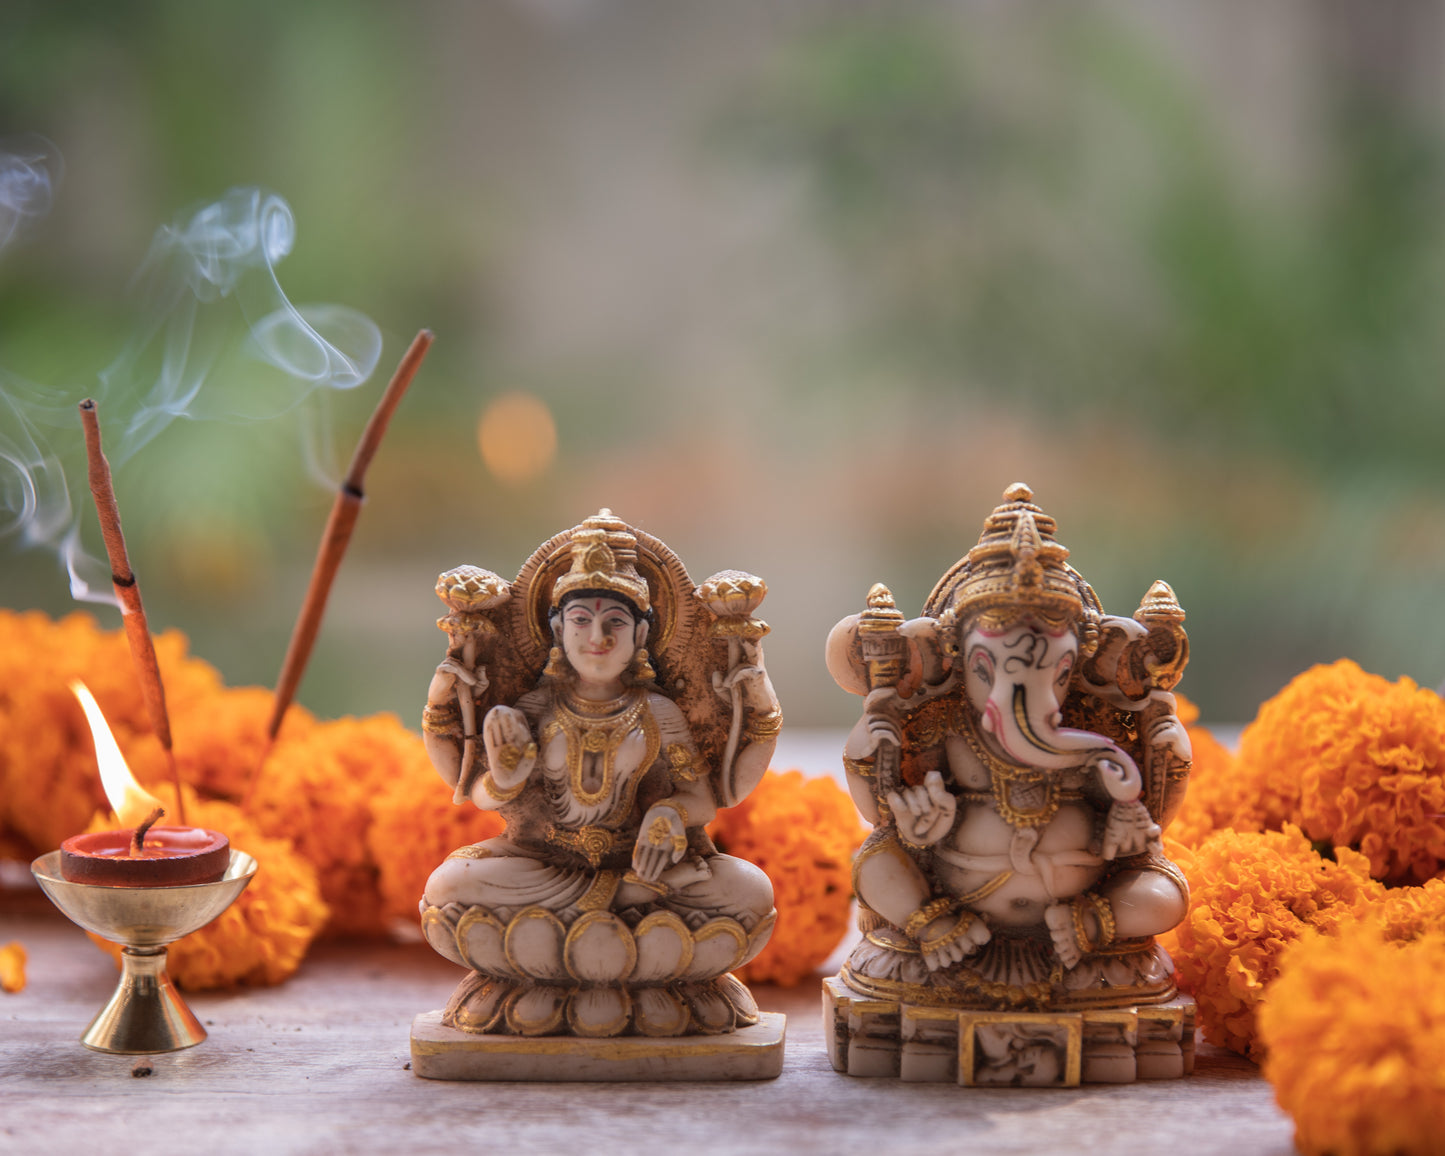 A divine and harmonious representation of two beloved deities, Goddess Lakshmi, the symbol of wealth and prosperity, and Lord Ganesh, the remover of obstacles.